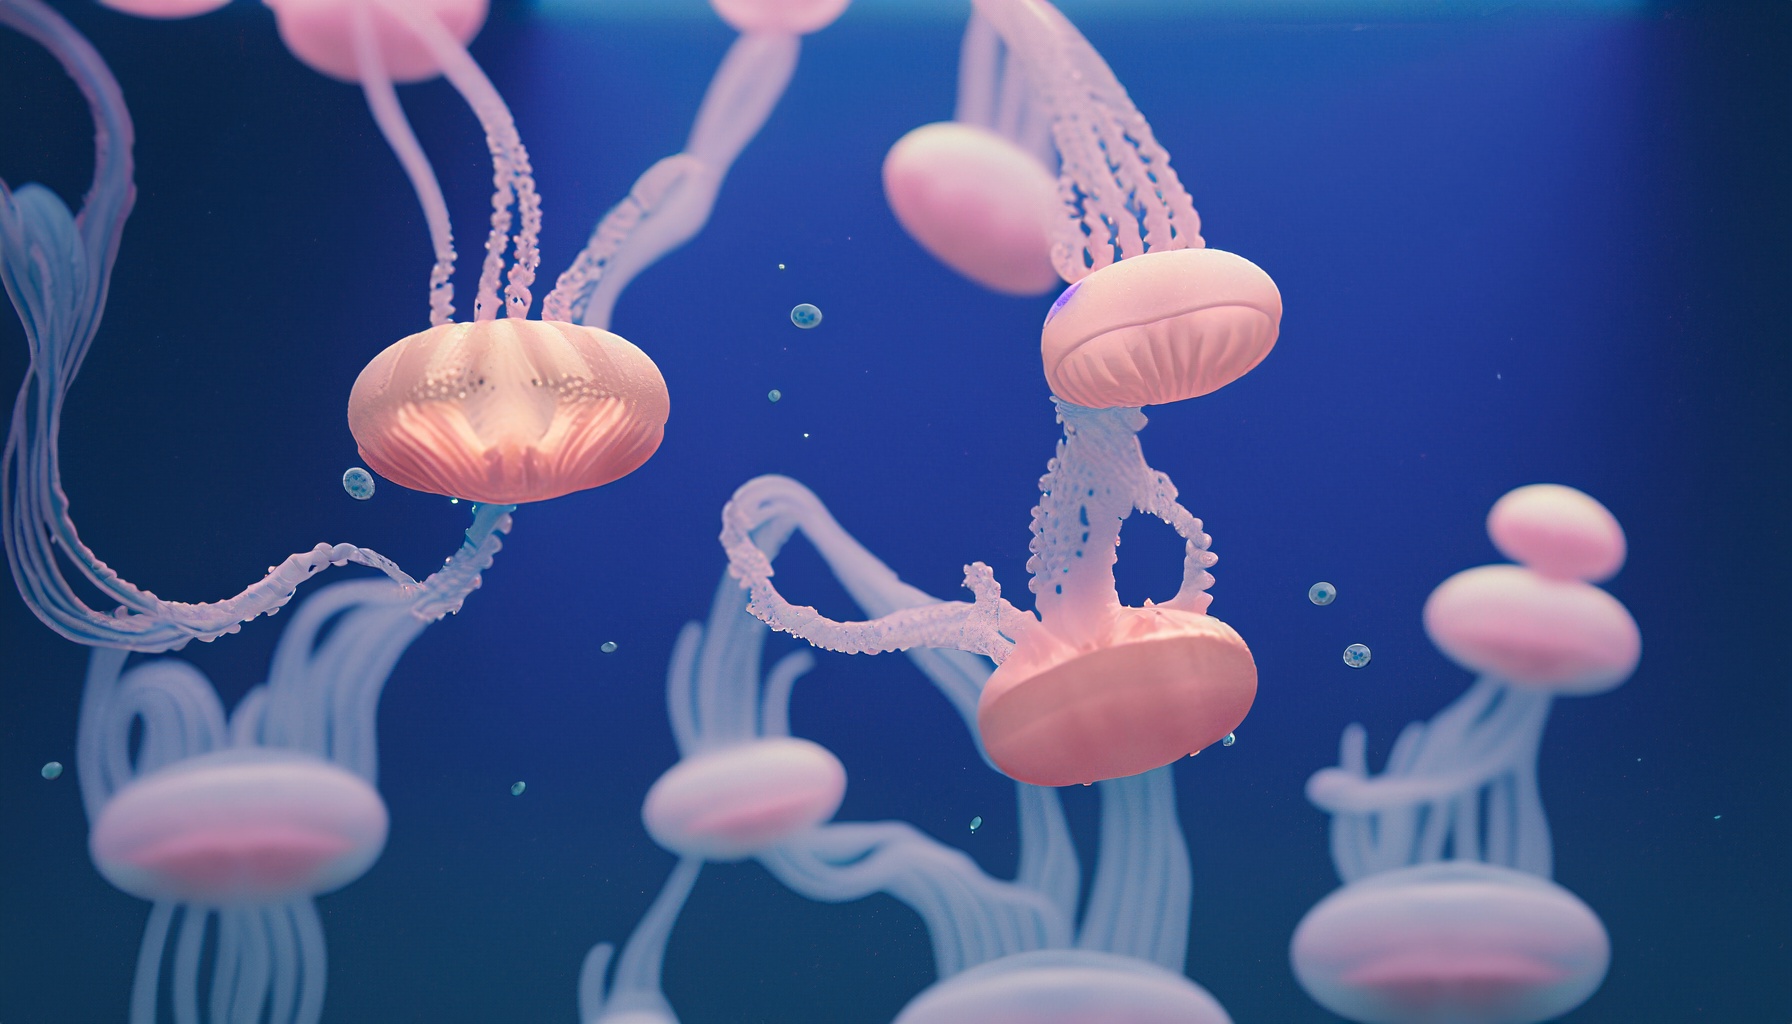 A group of jellyfish is known as a ‘smack’